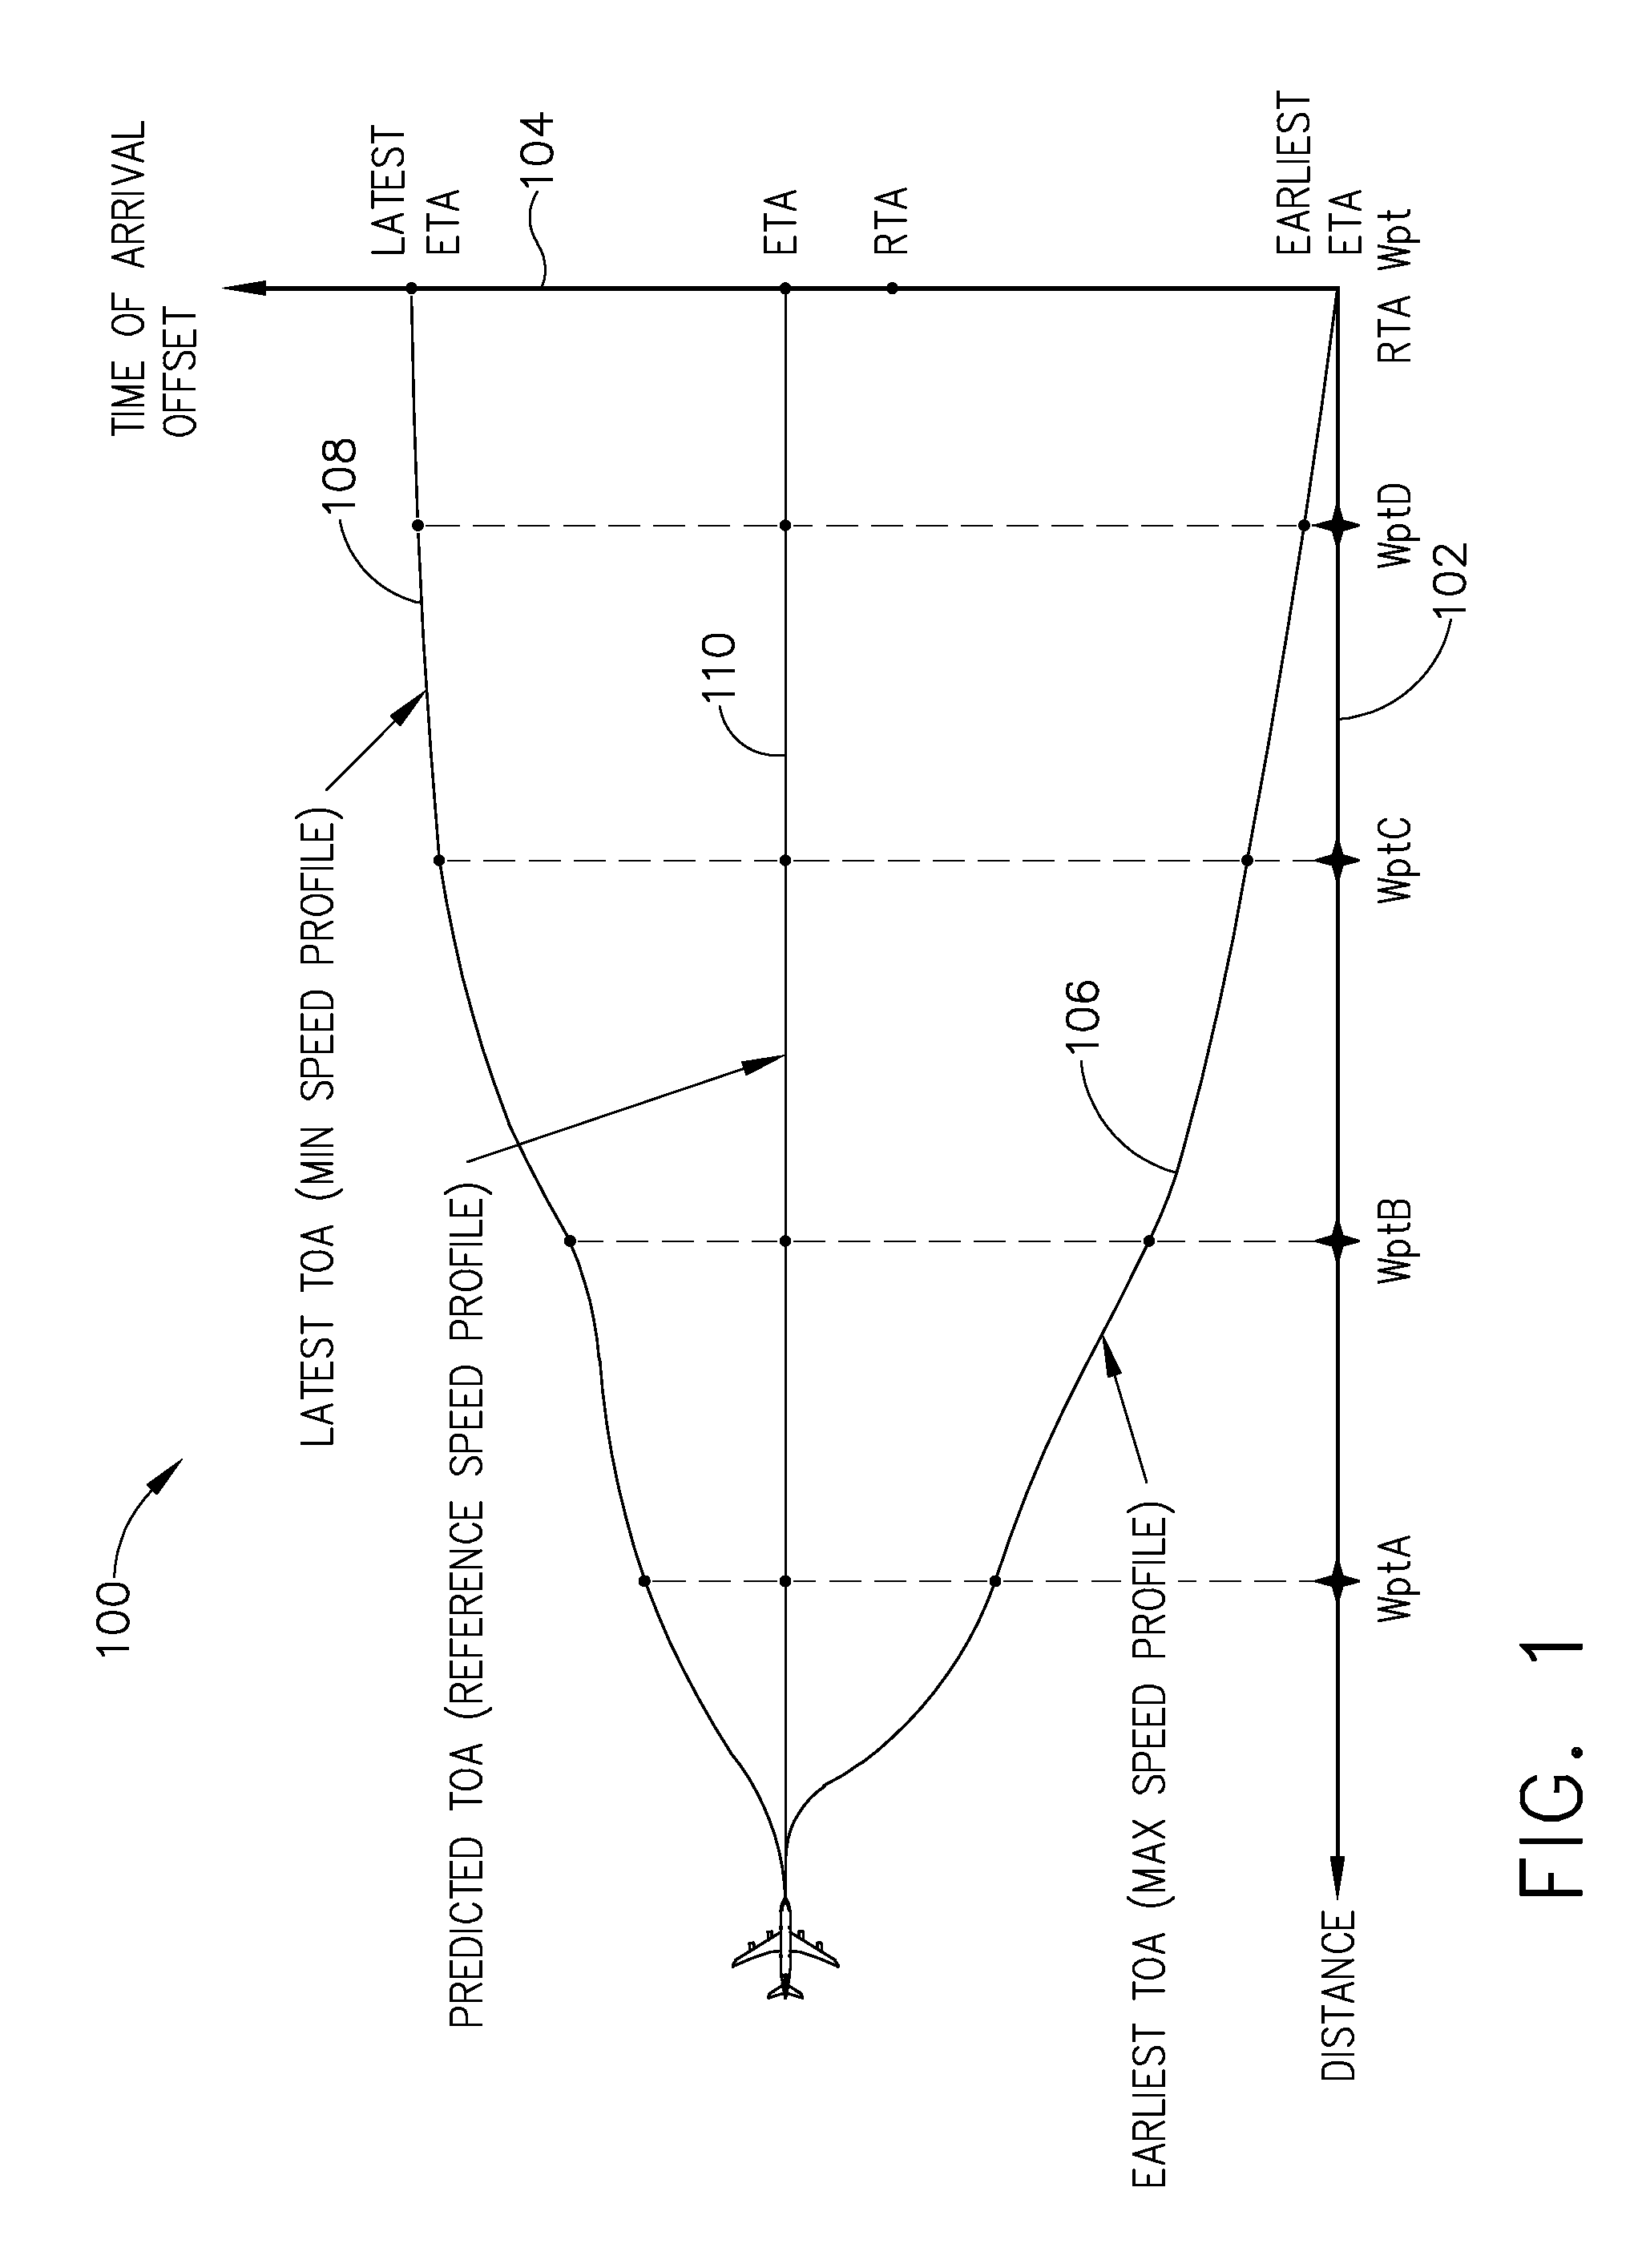 Methods and system for time of arrival control using time of arrival uncertainty